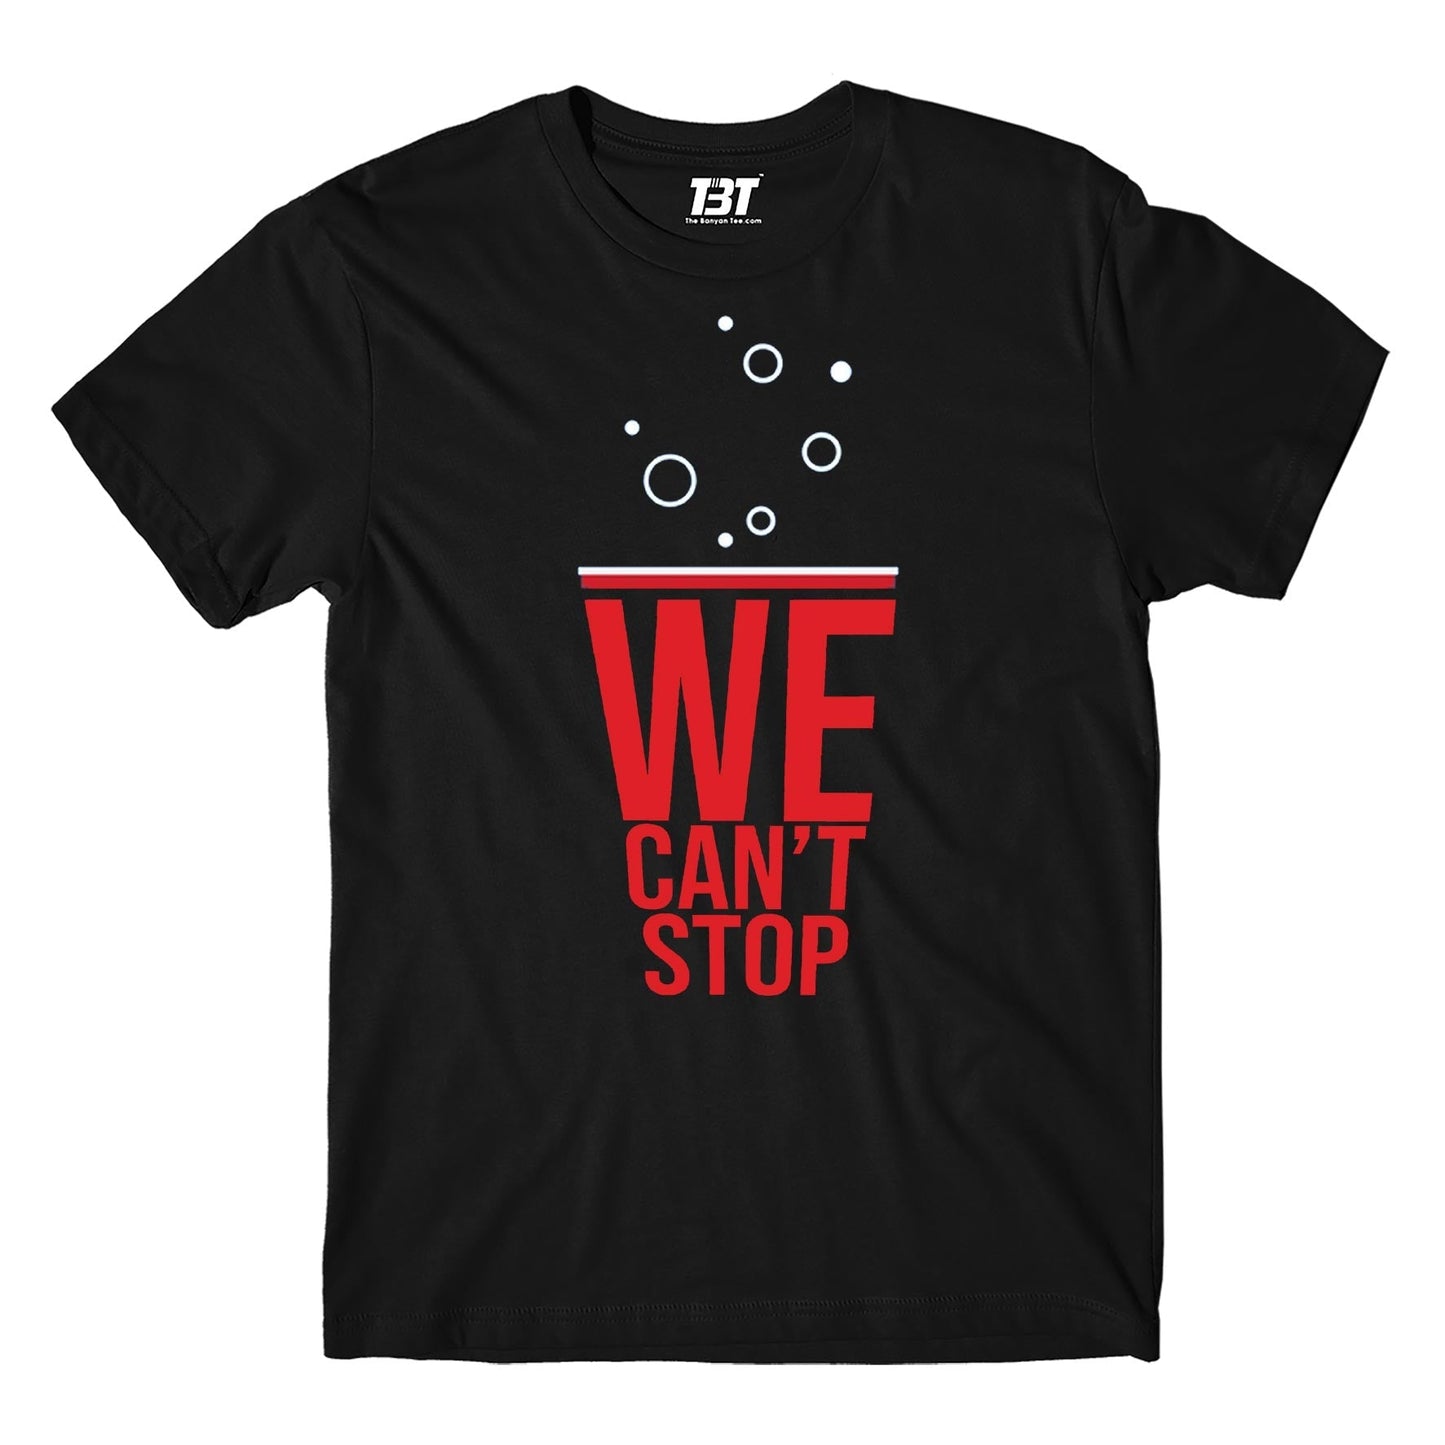 miley cyrus we can't stop t-shirt music band buy online usa united states the banyan tee tbt men women girls boys unisex black